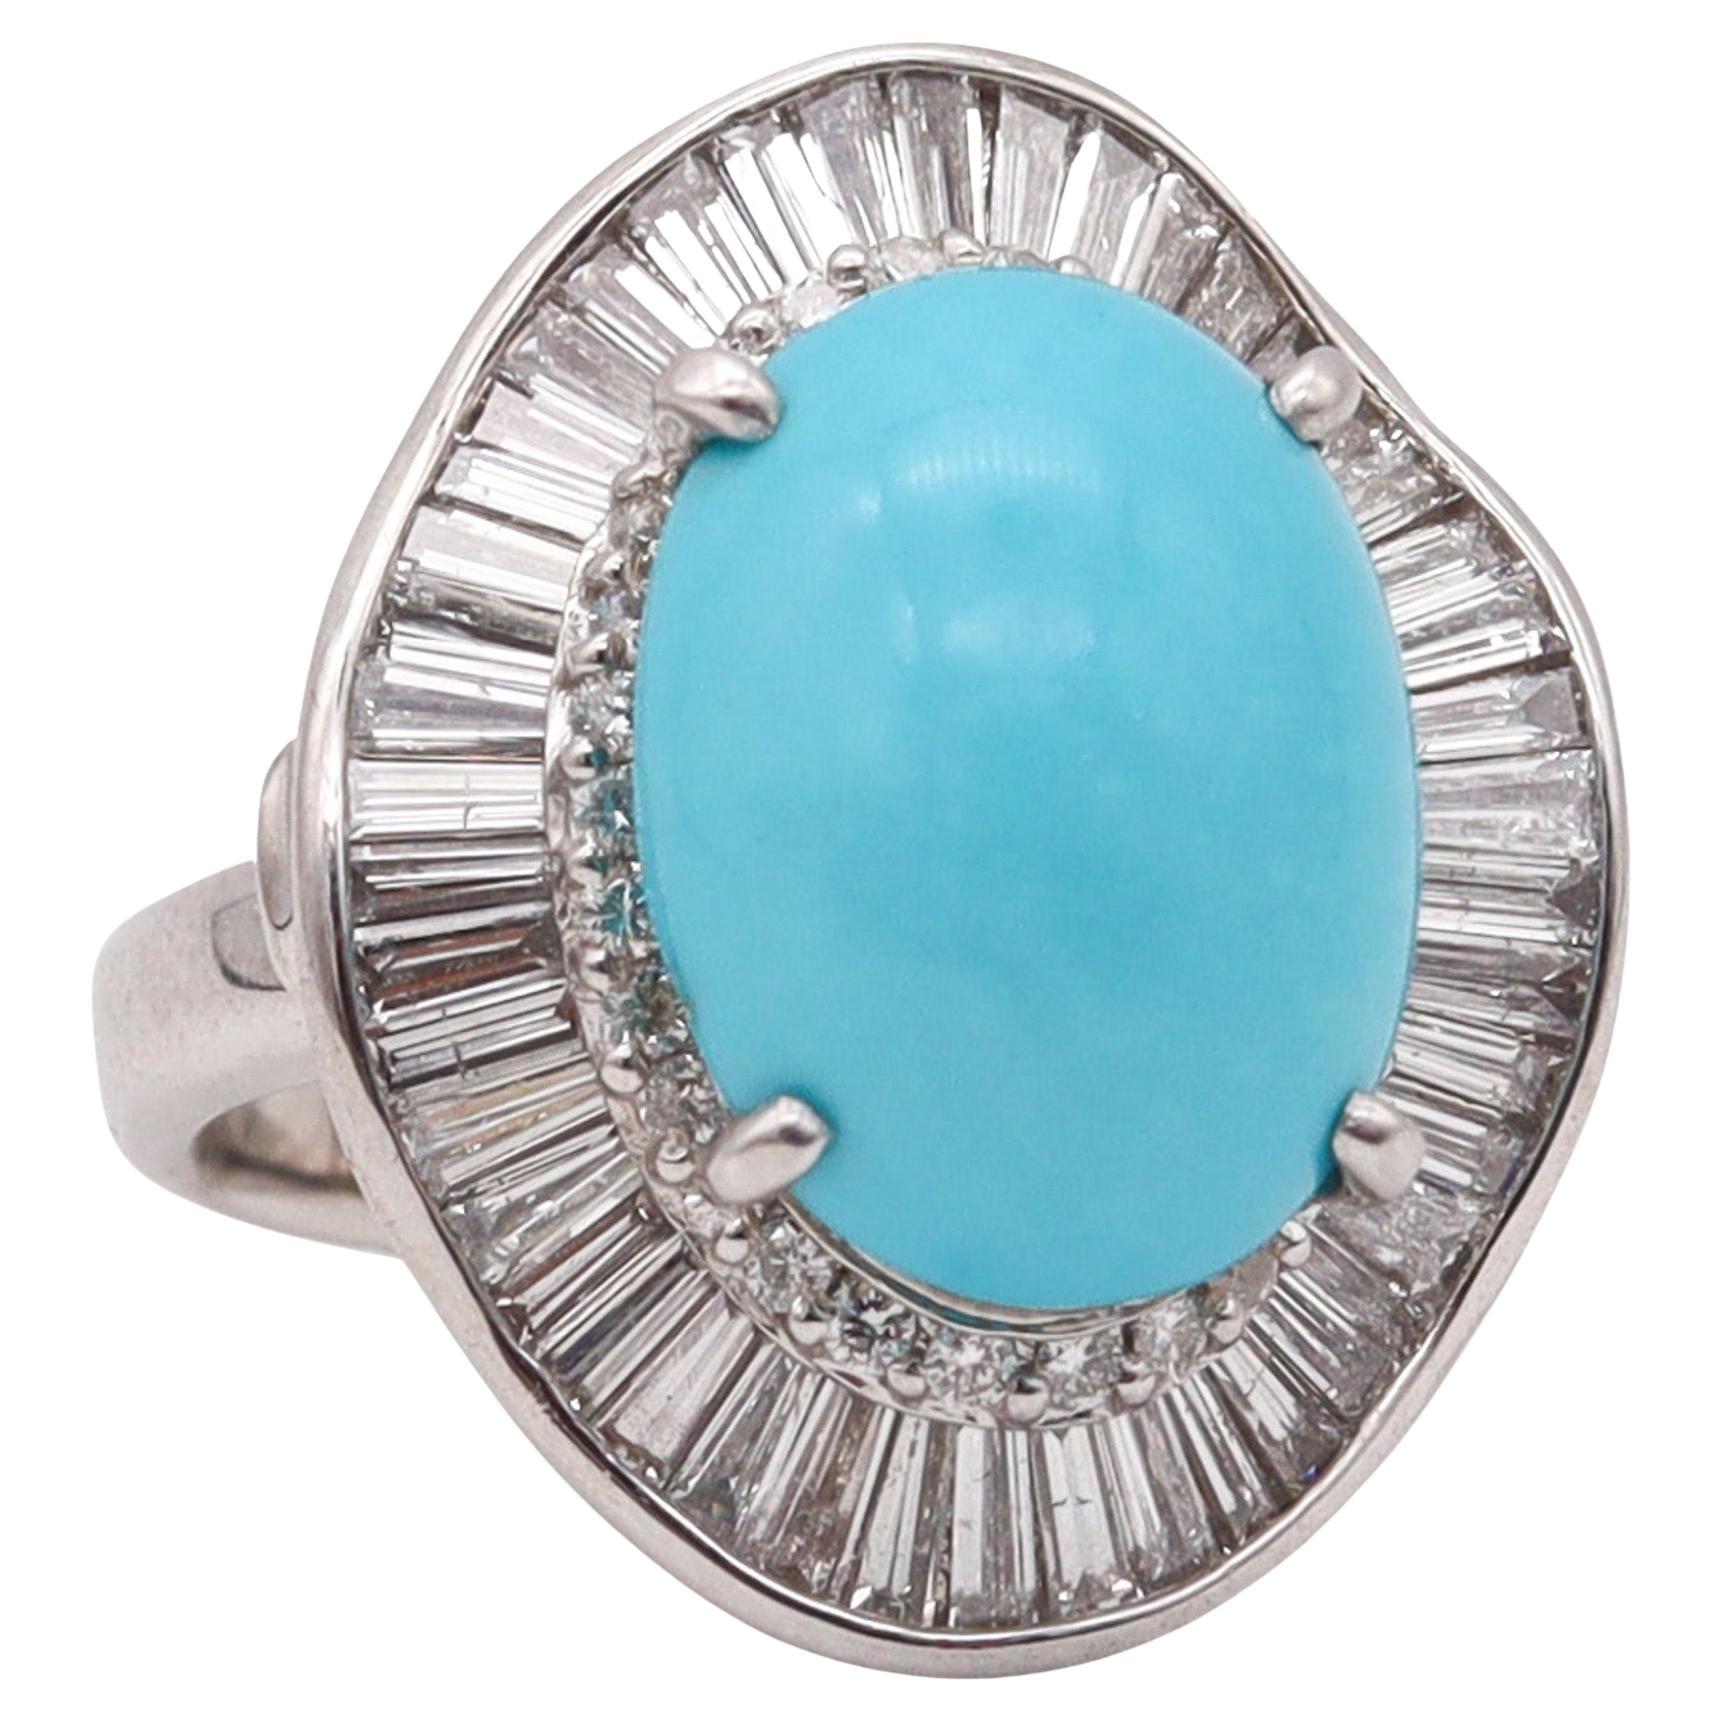 Ballerina Cocktail Ring In Solid Platinum With 10.02 Ctw Diamonds And Turquoise For Sale